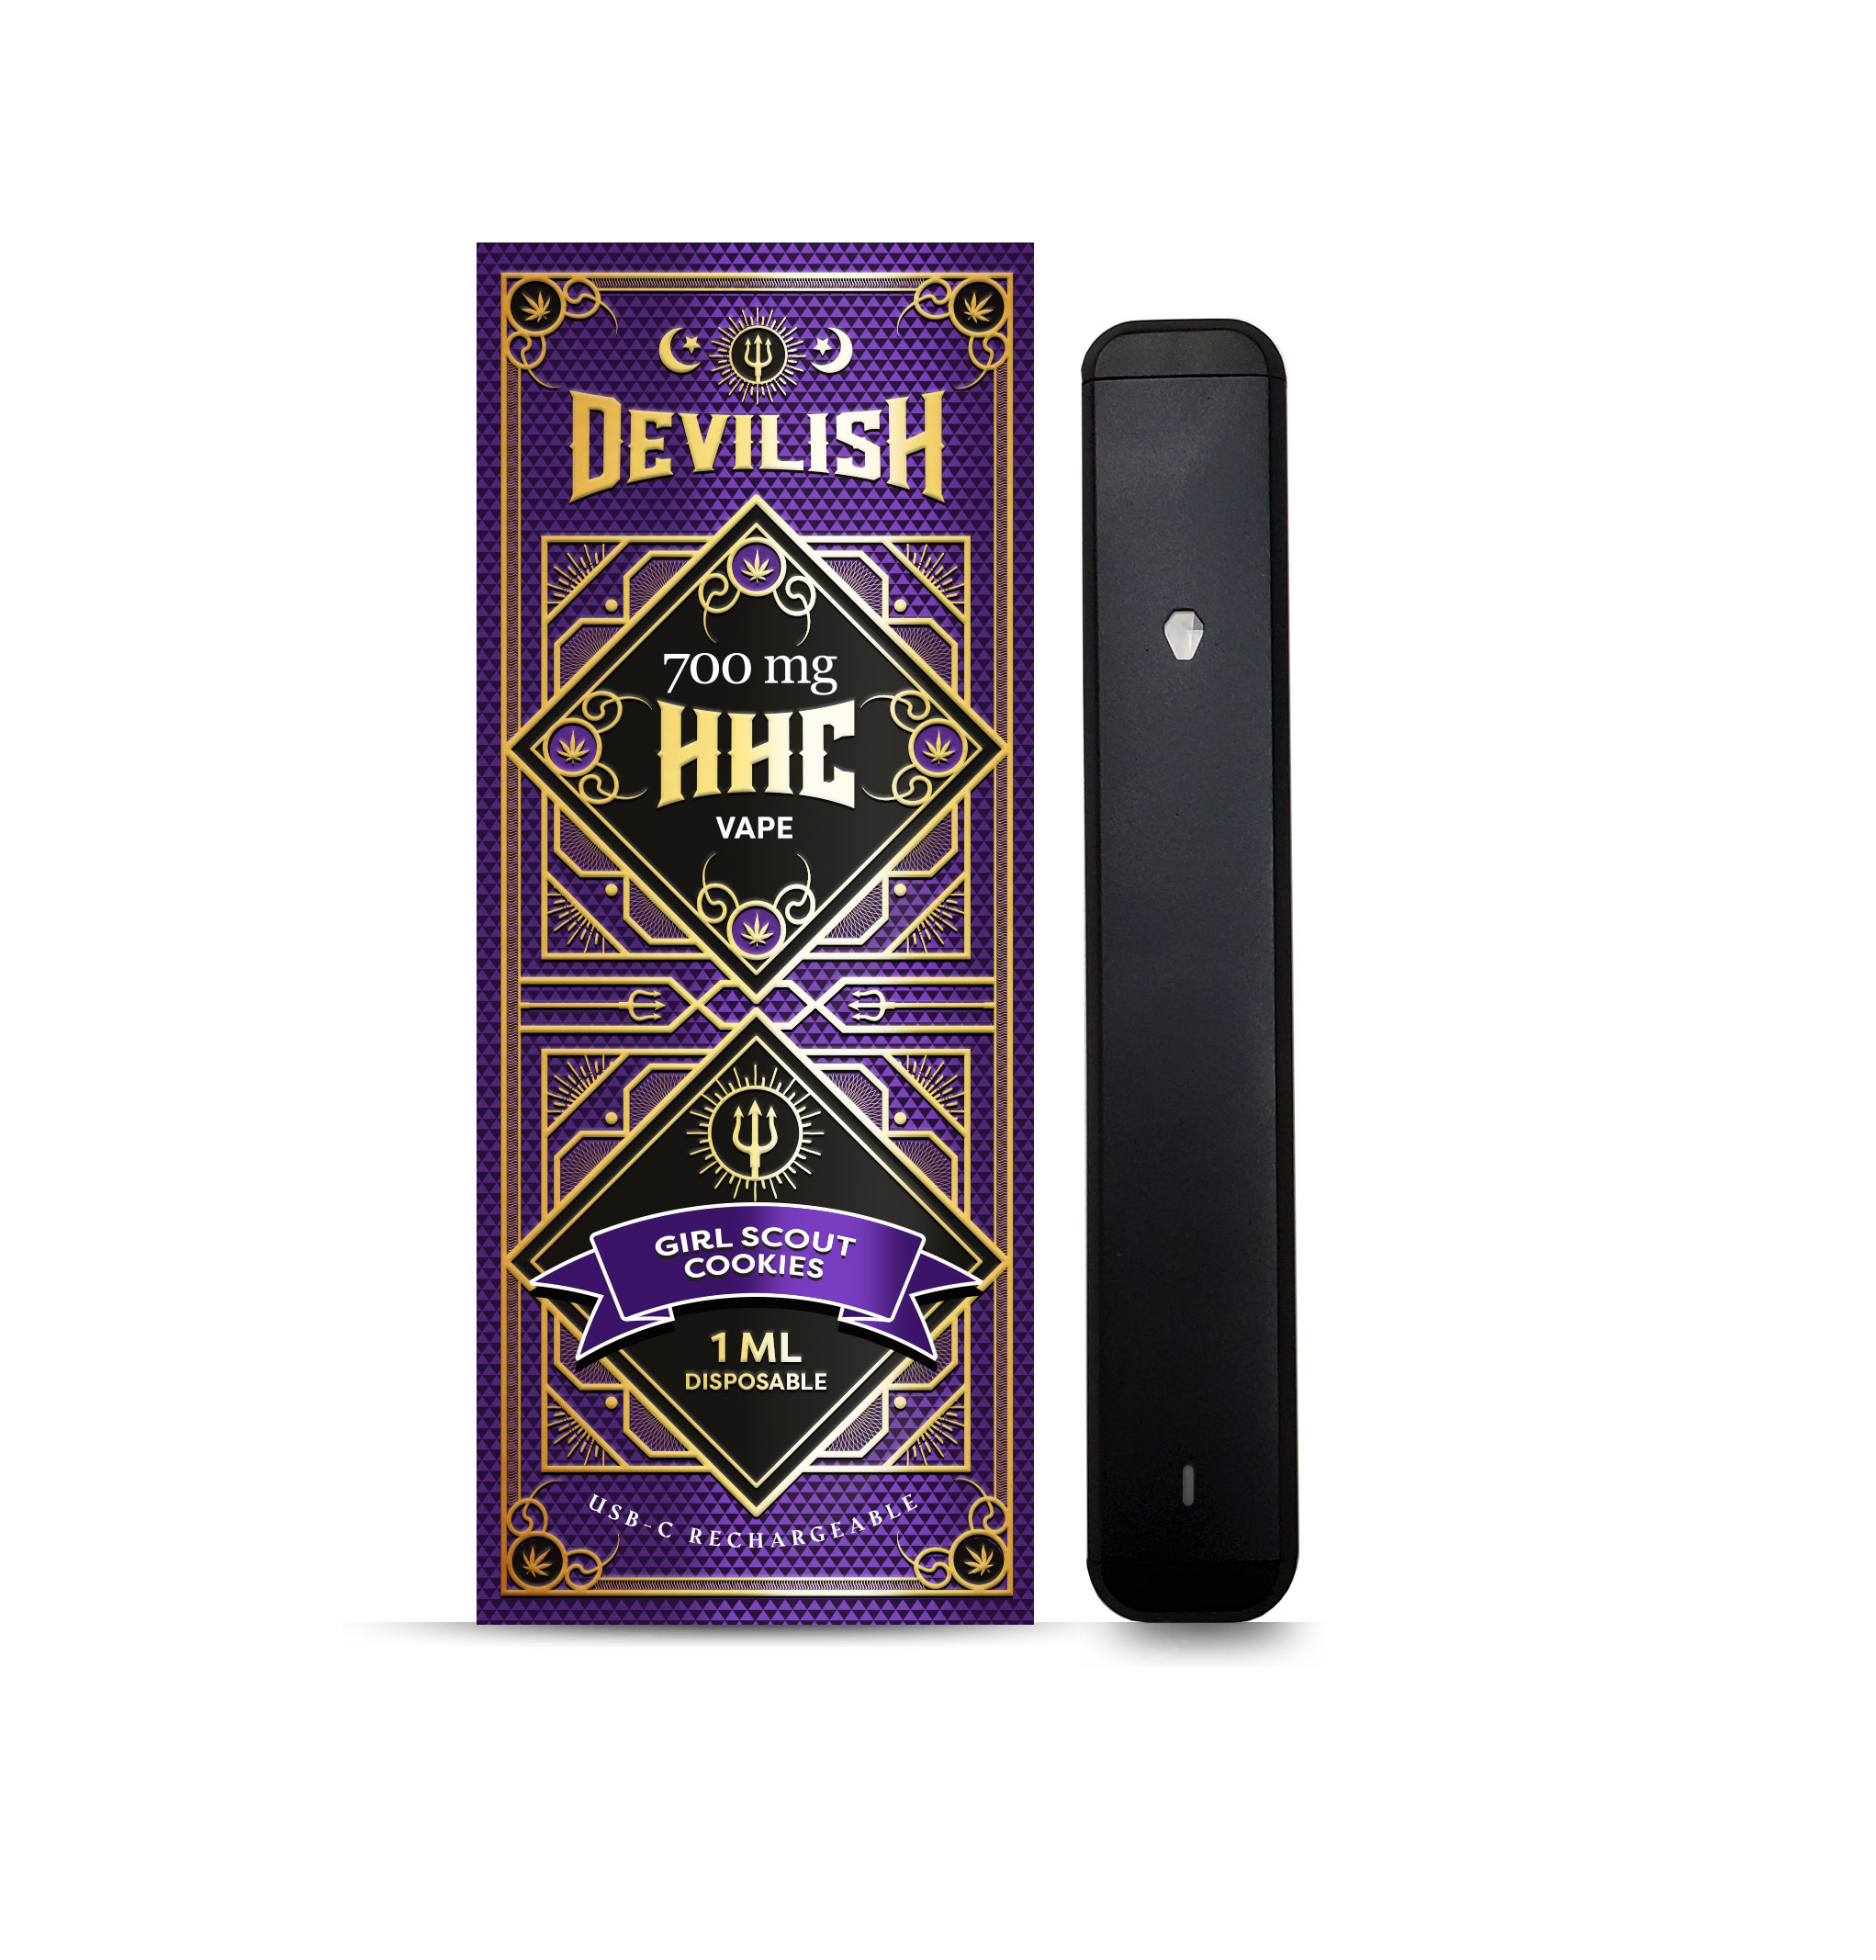 Devilish-700mg-HHC-Girl-Scout-Cookies